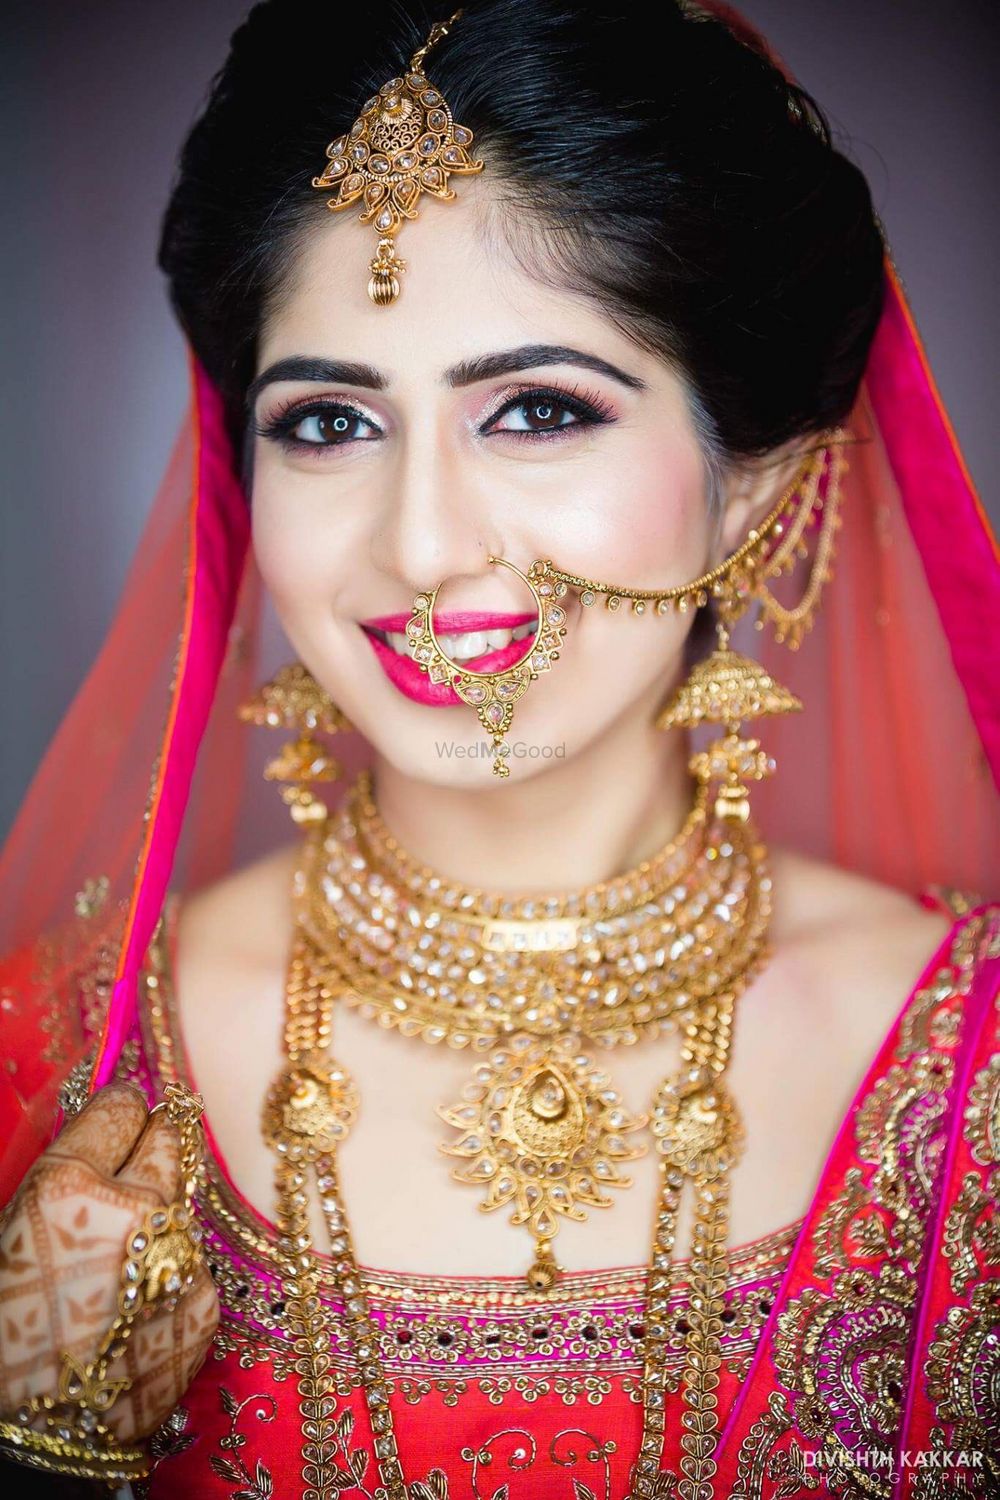 Photo of Bride with Antique Gold Bridal Jewellery